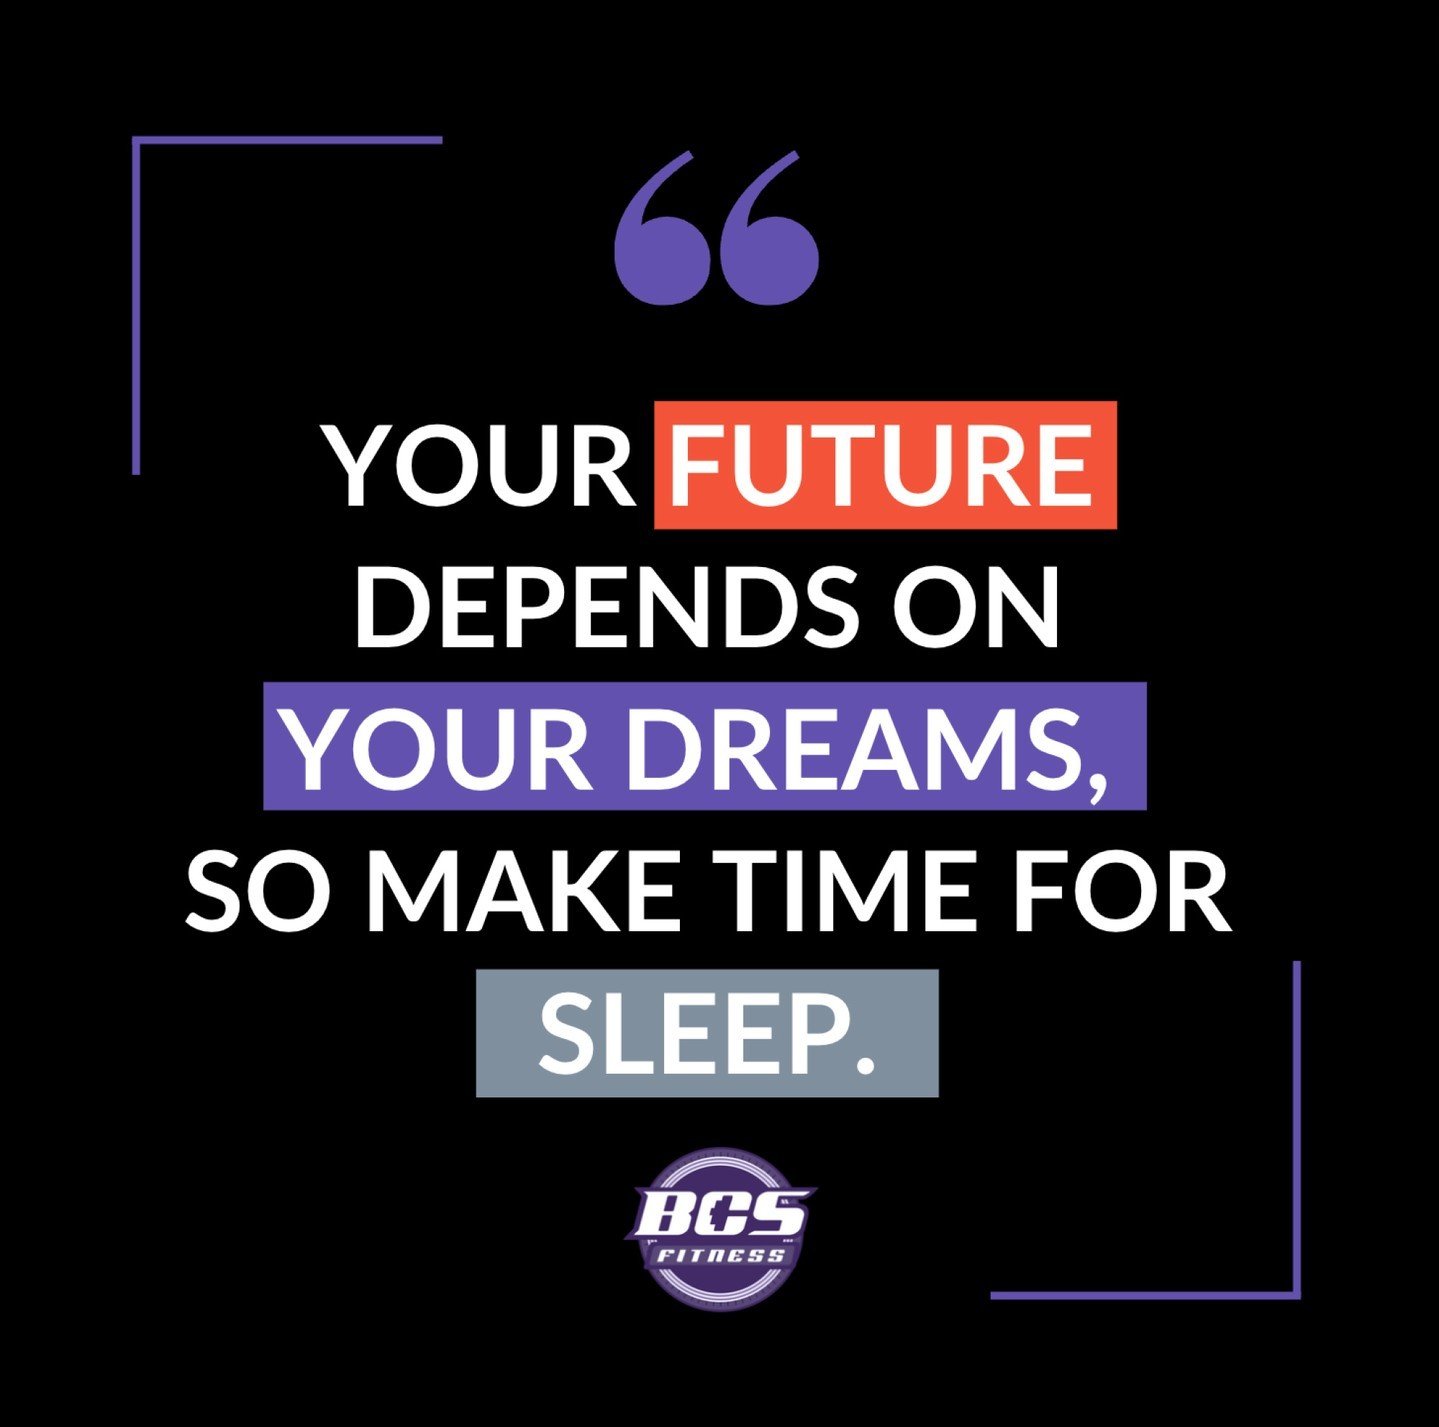 🌙💤 Sleep is the &ldquo;glue&rdquo; that holds your healthy lifestyle together.

It helps your brain and body recover, restore, and recharge &mdash; so you have the energy to conquer your goals!

Give it a prime spot on your list of priorities, righ